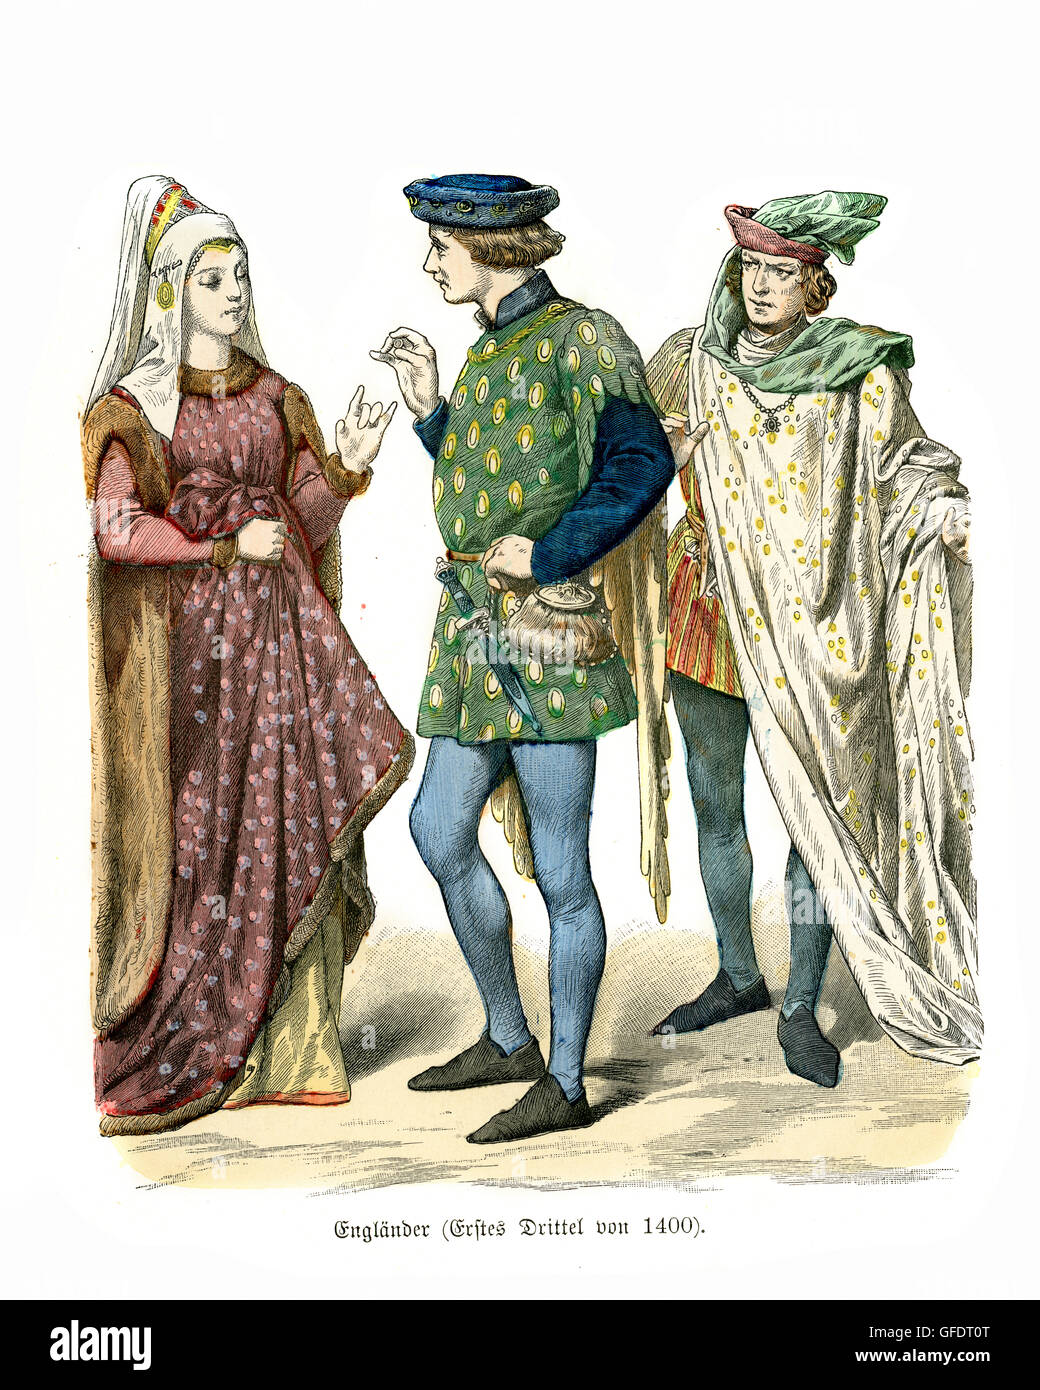 Mens and womens fashions of Medieval England at the start of the 15th ...